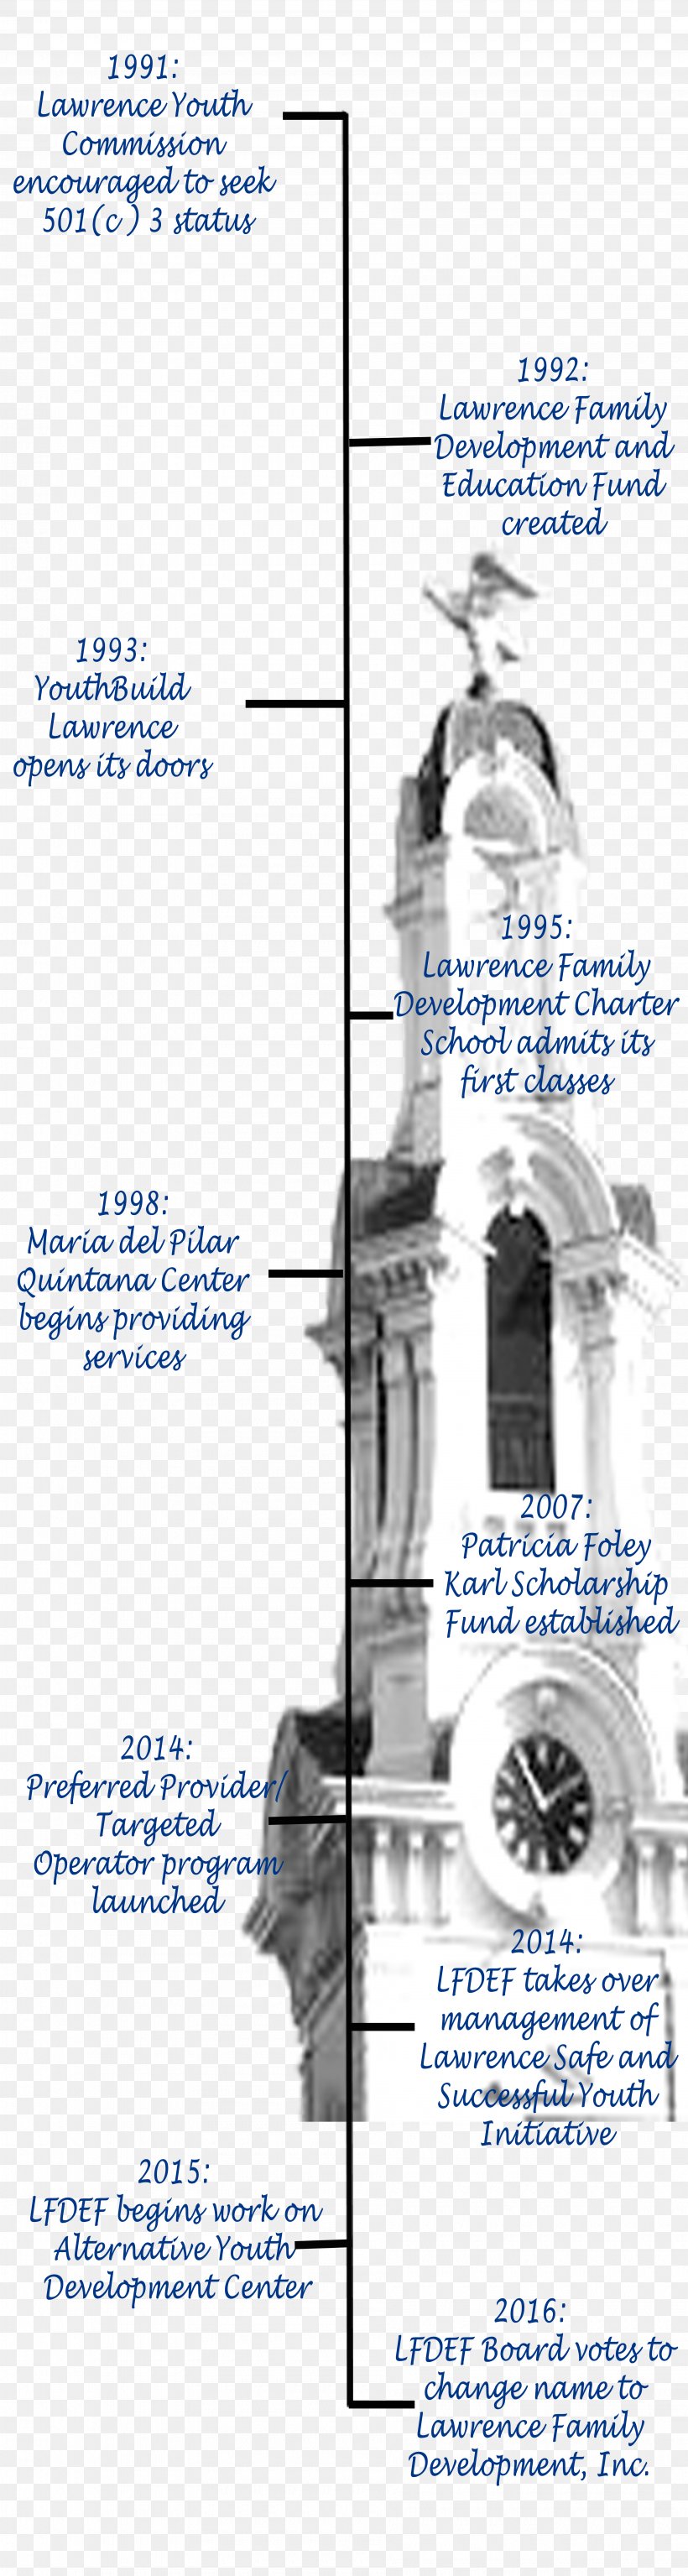 Lawrence Family Development Charter School Fall River 1912 Lawrence Textile Strike History Quintana Center, PNG, 3600x13480px, Fall River, City, Diagram, Education, History Download Free